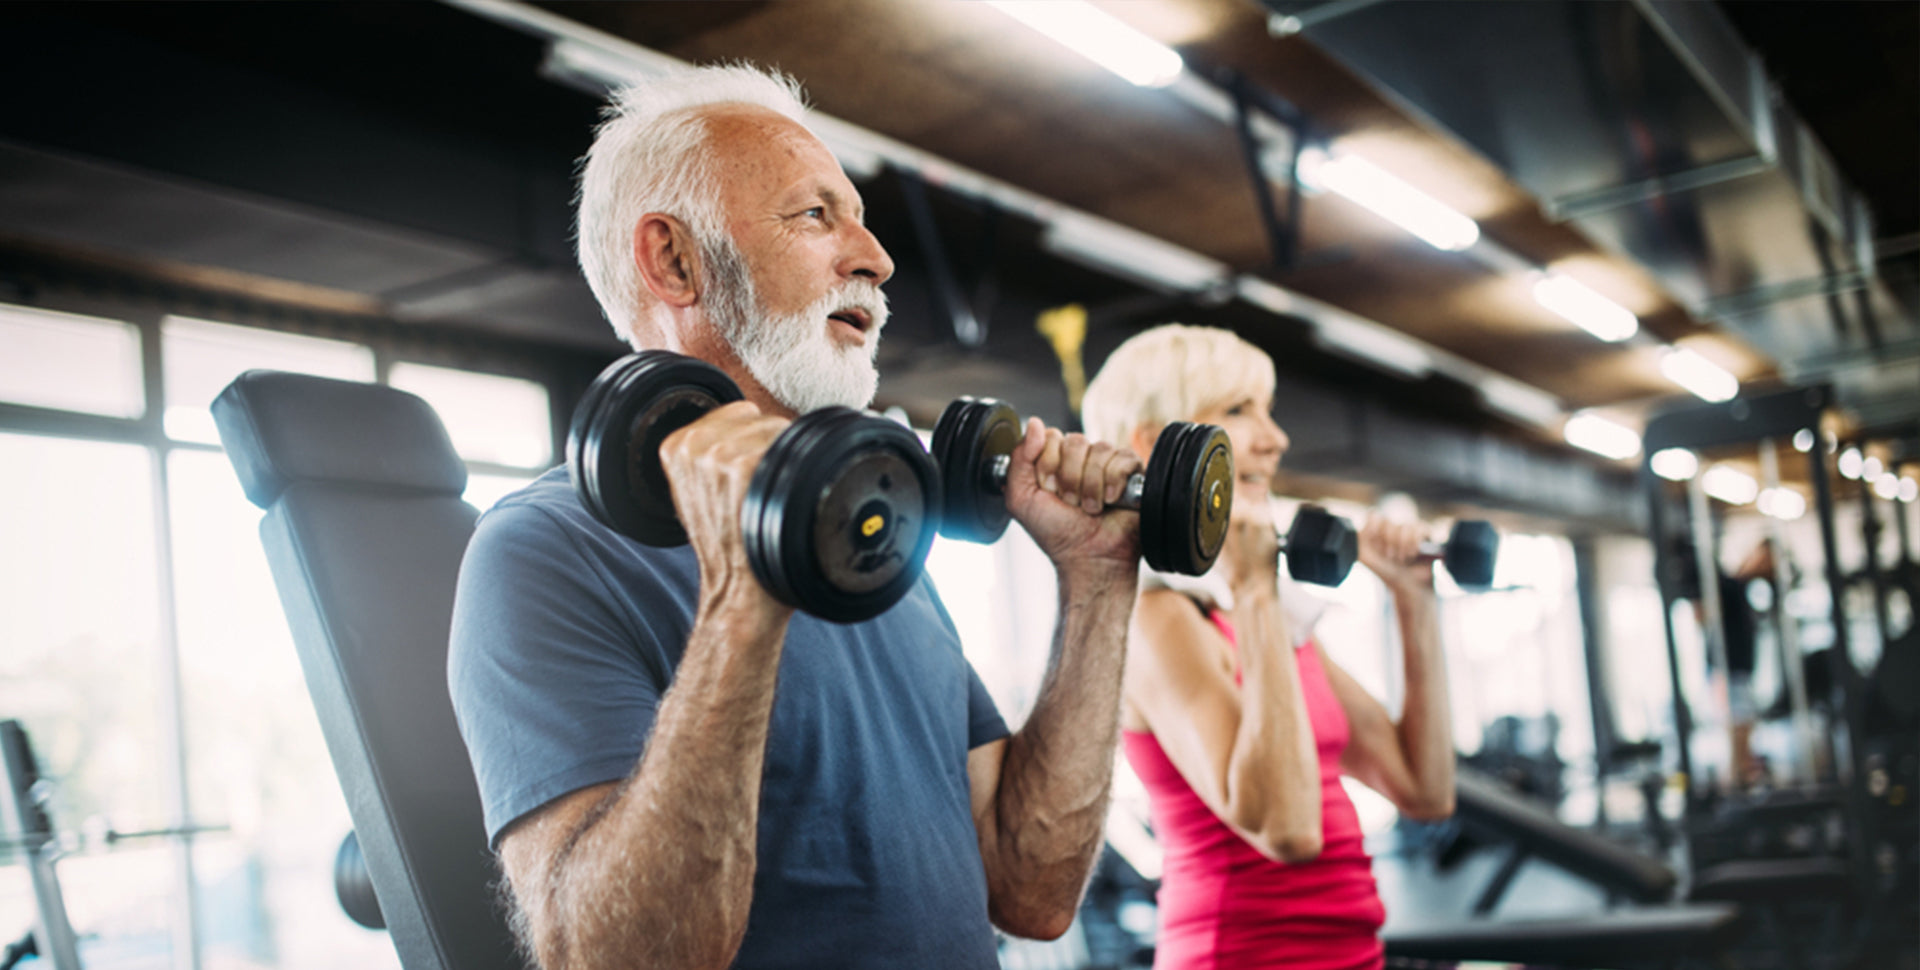 What Are The Benefits of Exercising for Older Adults - Born Tough Blog